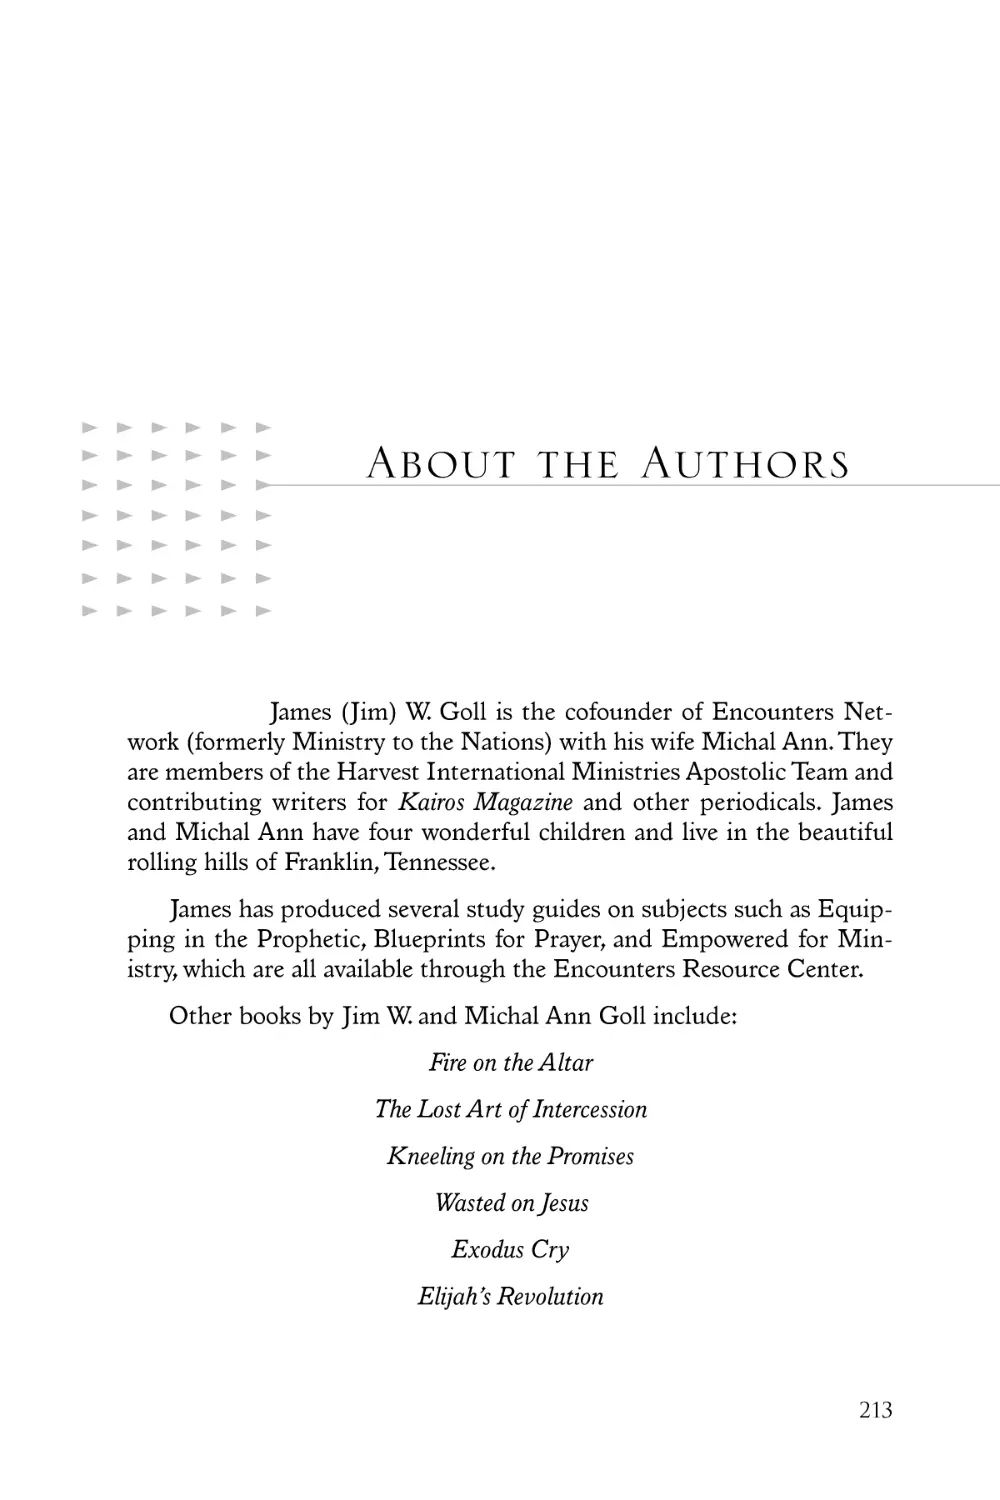 ABOUT THE AUTHORS